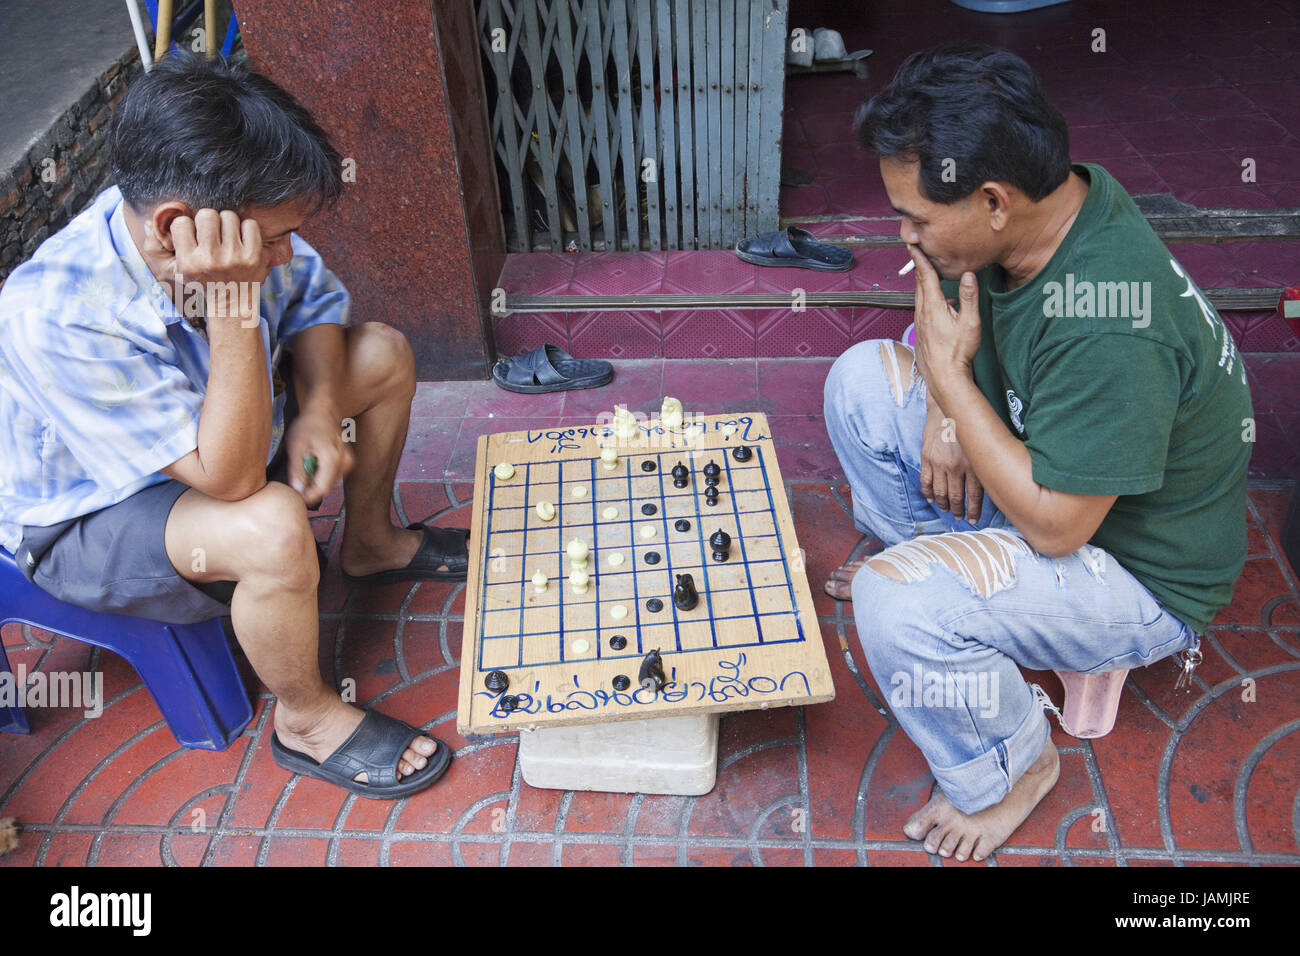 Elderly Thai Meet Friend And Play Local Chess Game Together, Shot In  Chantaburi Thailand. Stock Photo, Picture and Royalty Free Image. Image  83102854.